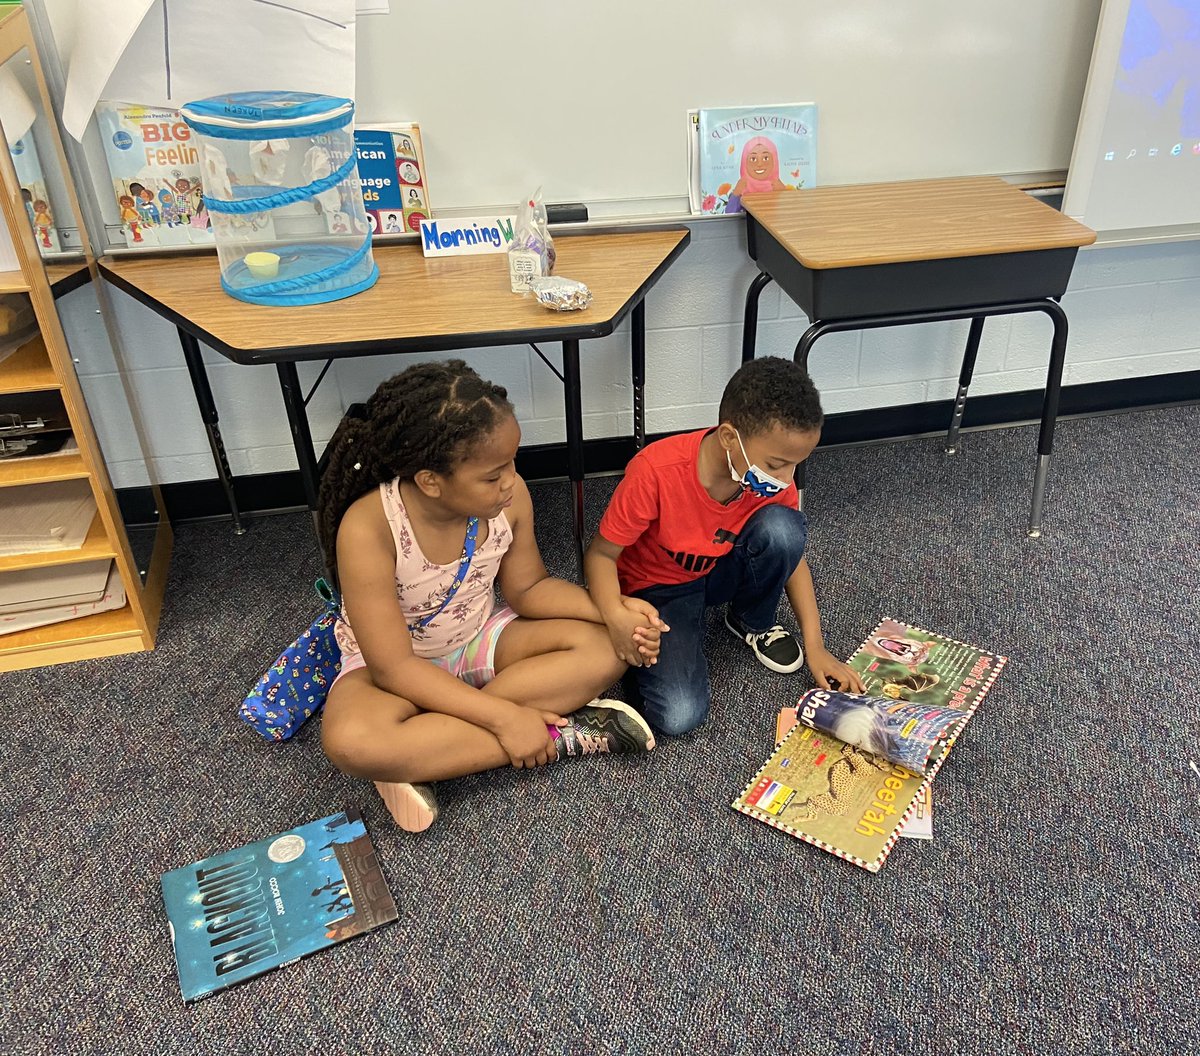 RTAPS'> @CampbellAPS</a>: Moments like this are why we are here doing this work <a target='_blank' href='https://t.co/nvnsmGXeDq'>https://t.co/nvnsmGXeDq</a>